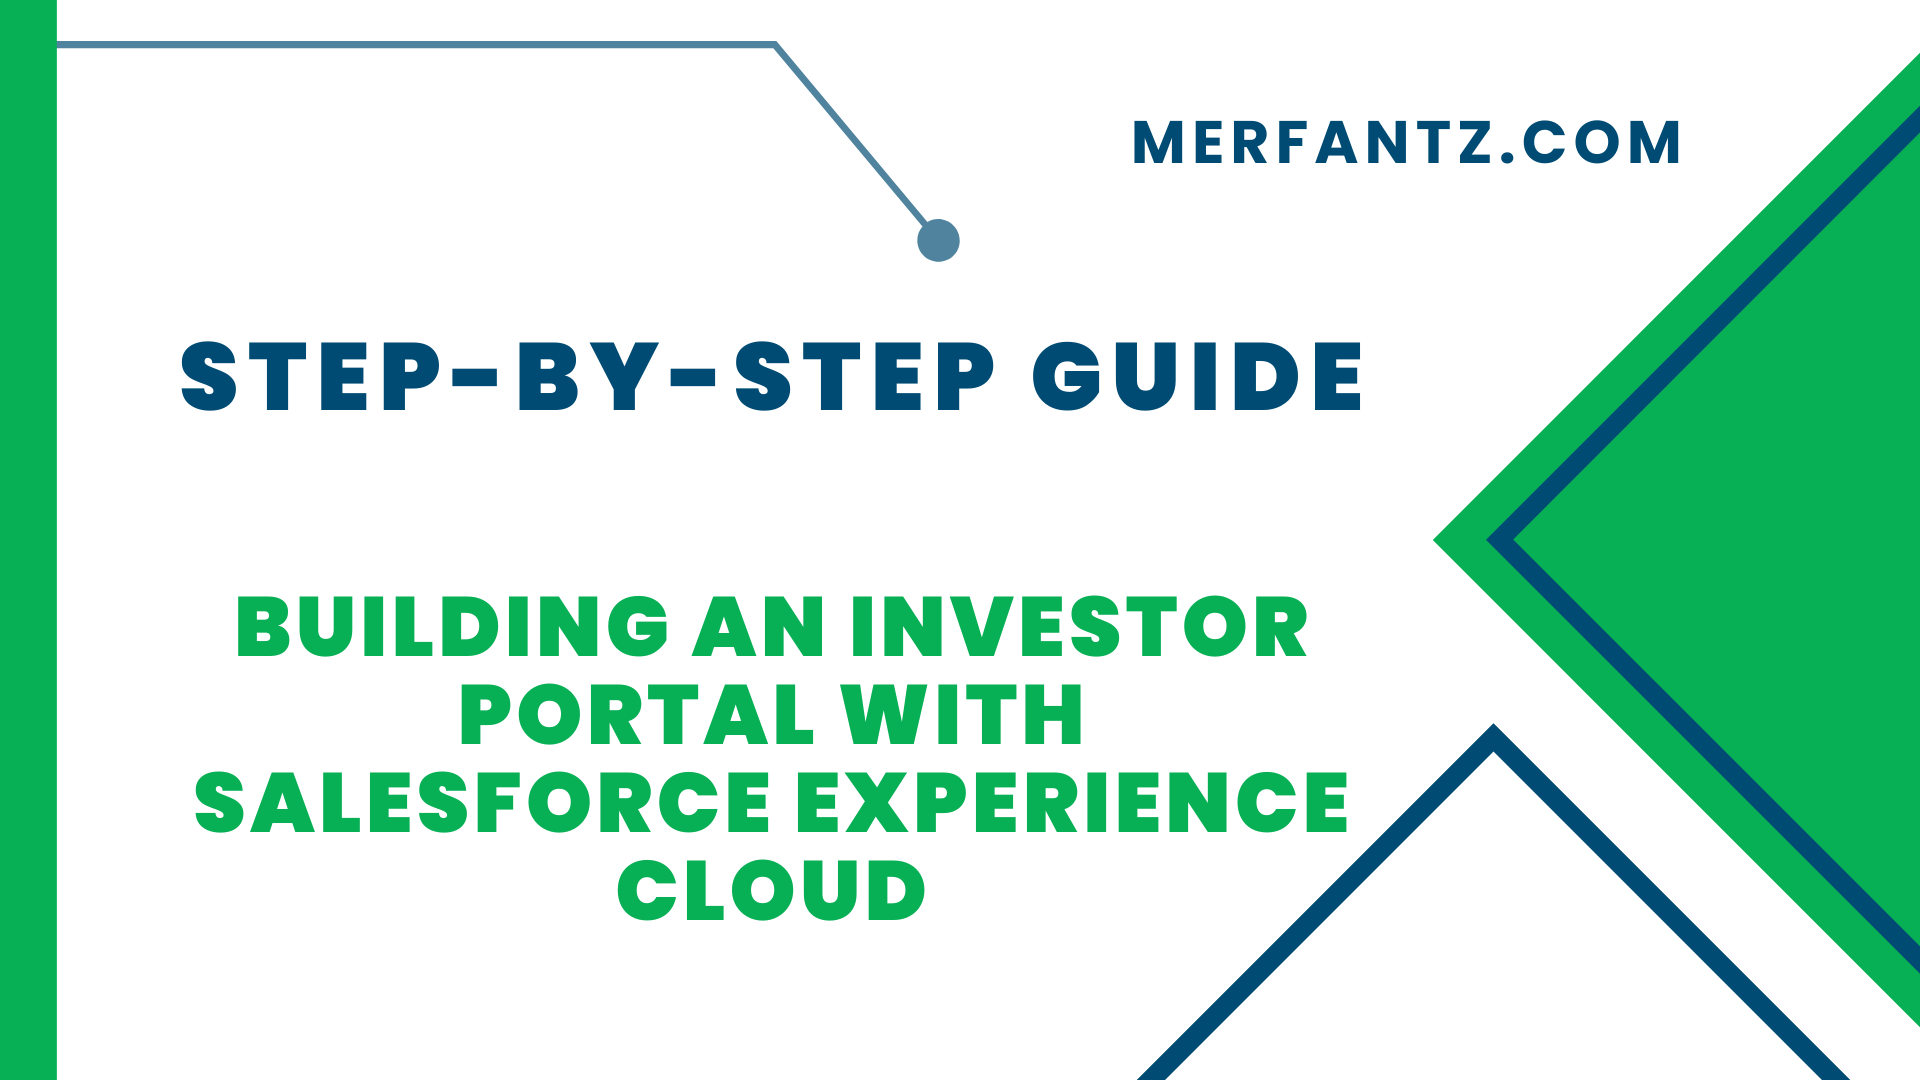 Building an Investor Portal with Salesforce Experience Cloud